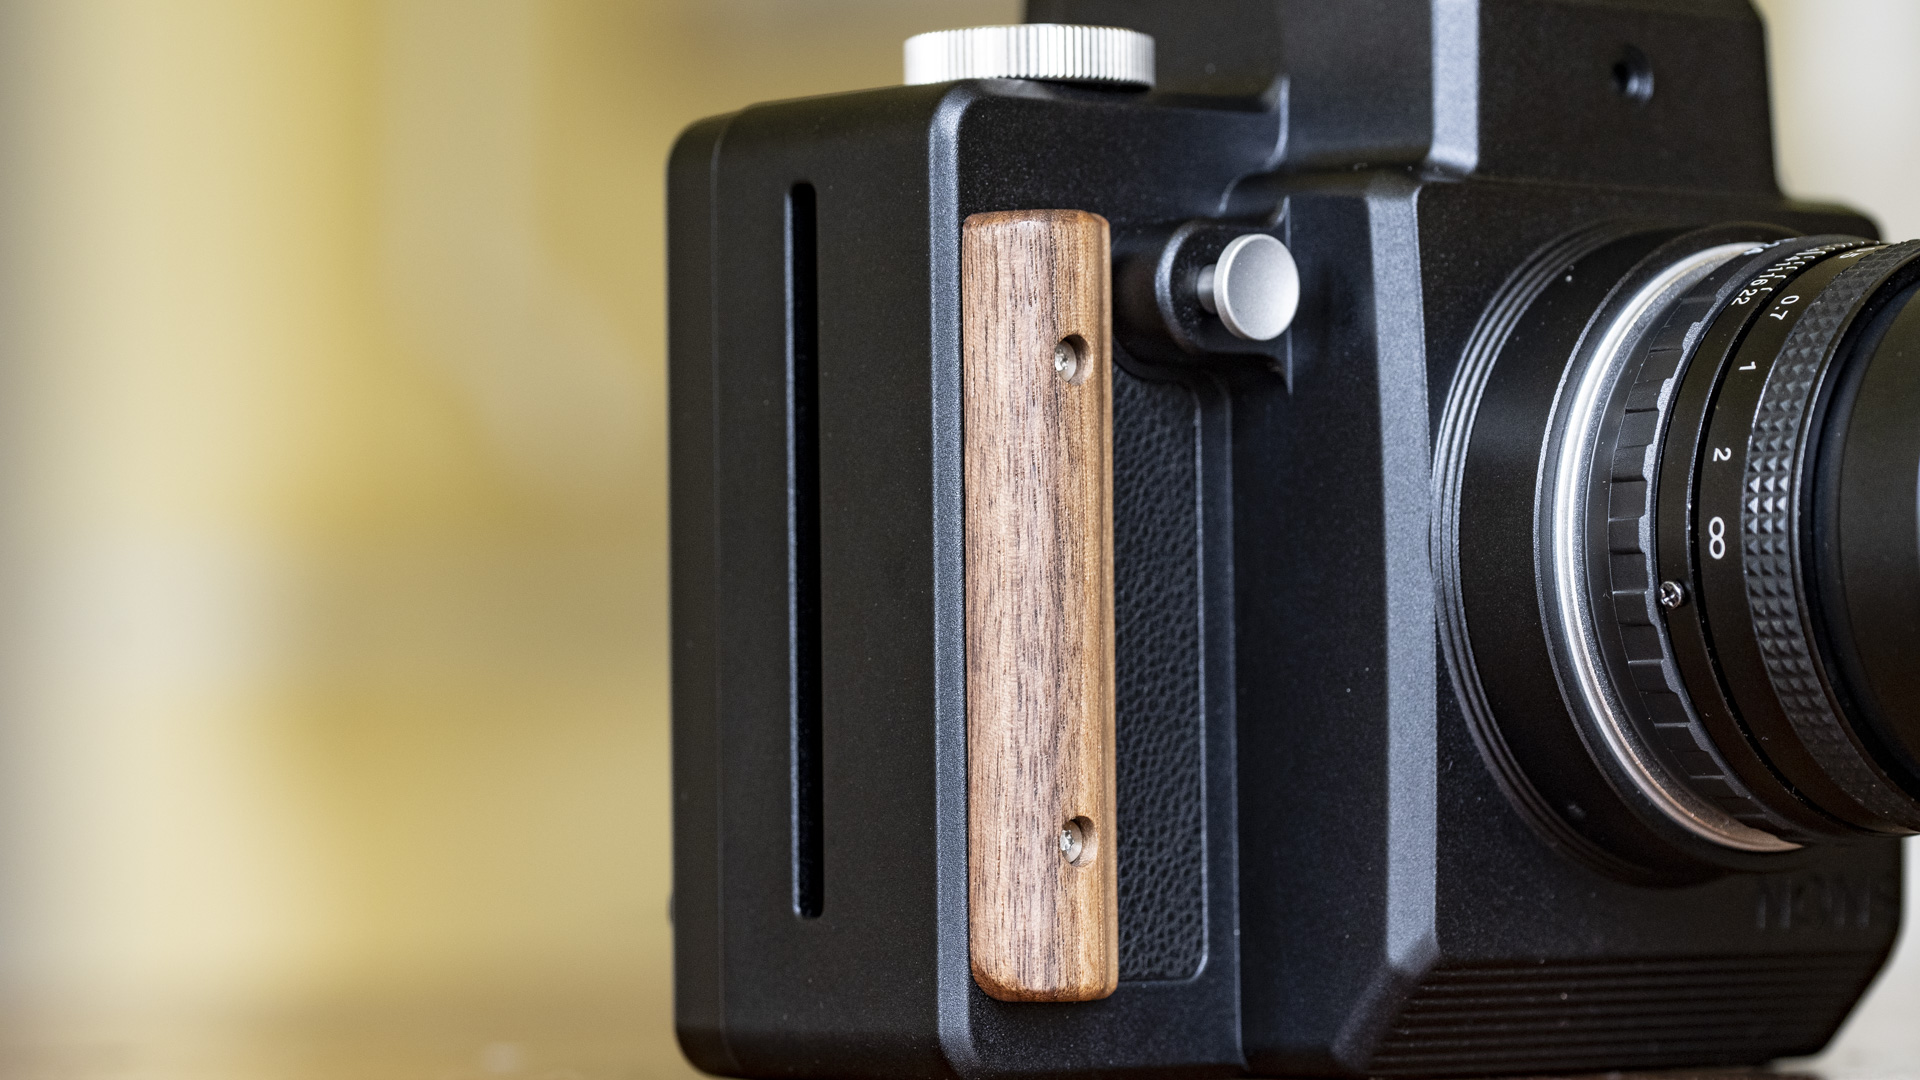 Close up of the Nons SL660 instant camera's wooden grip